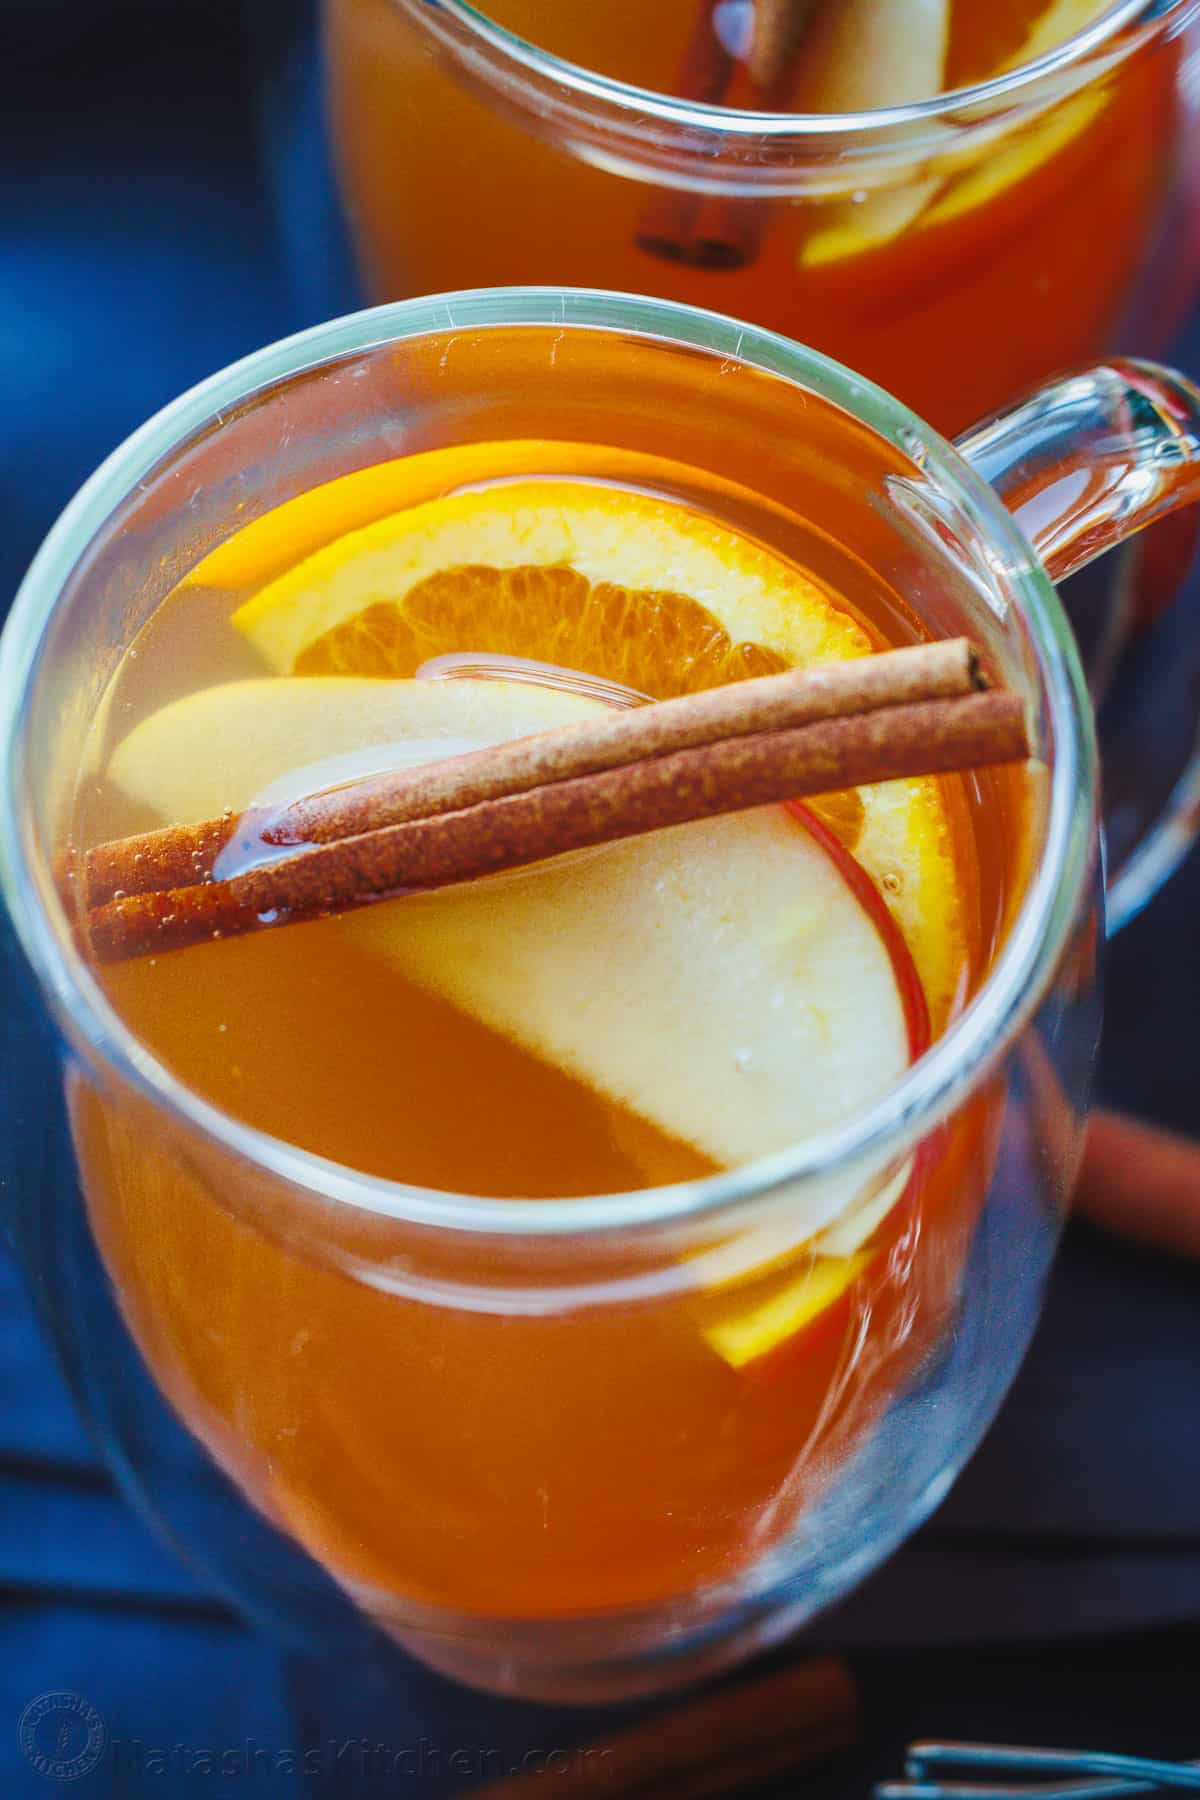 Apple cider with cinnamon stick and apple and orange slices in a mug